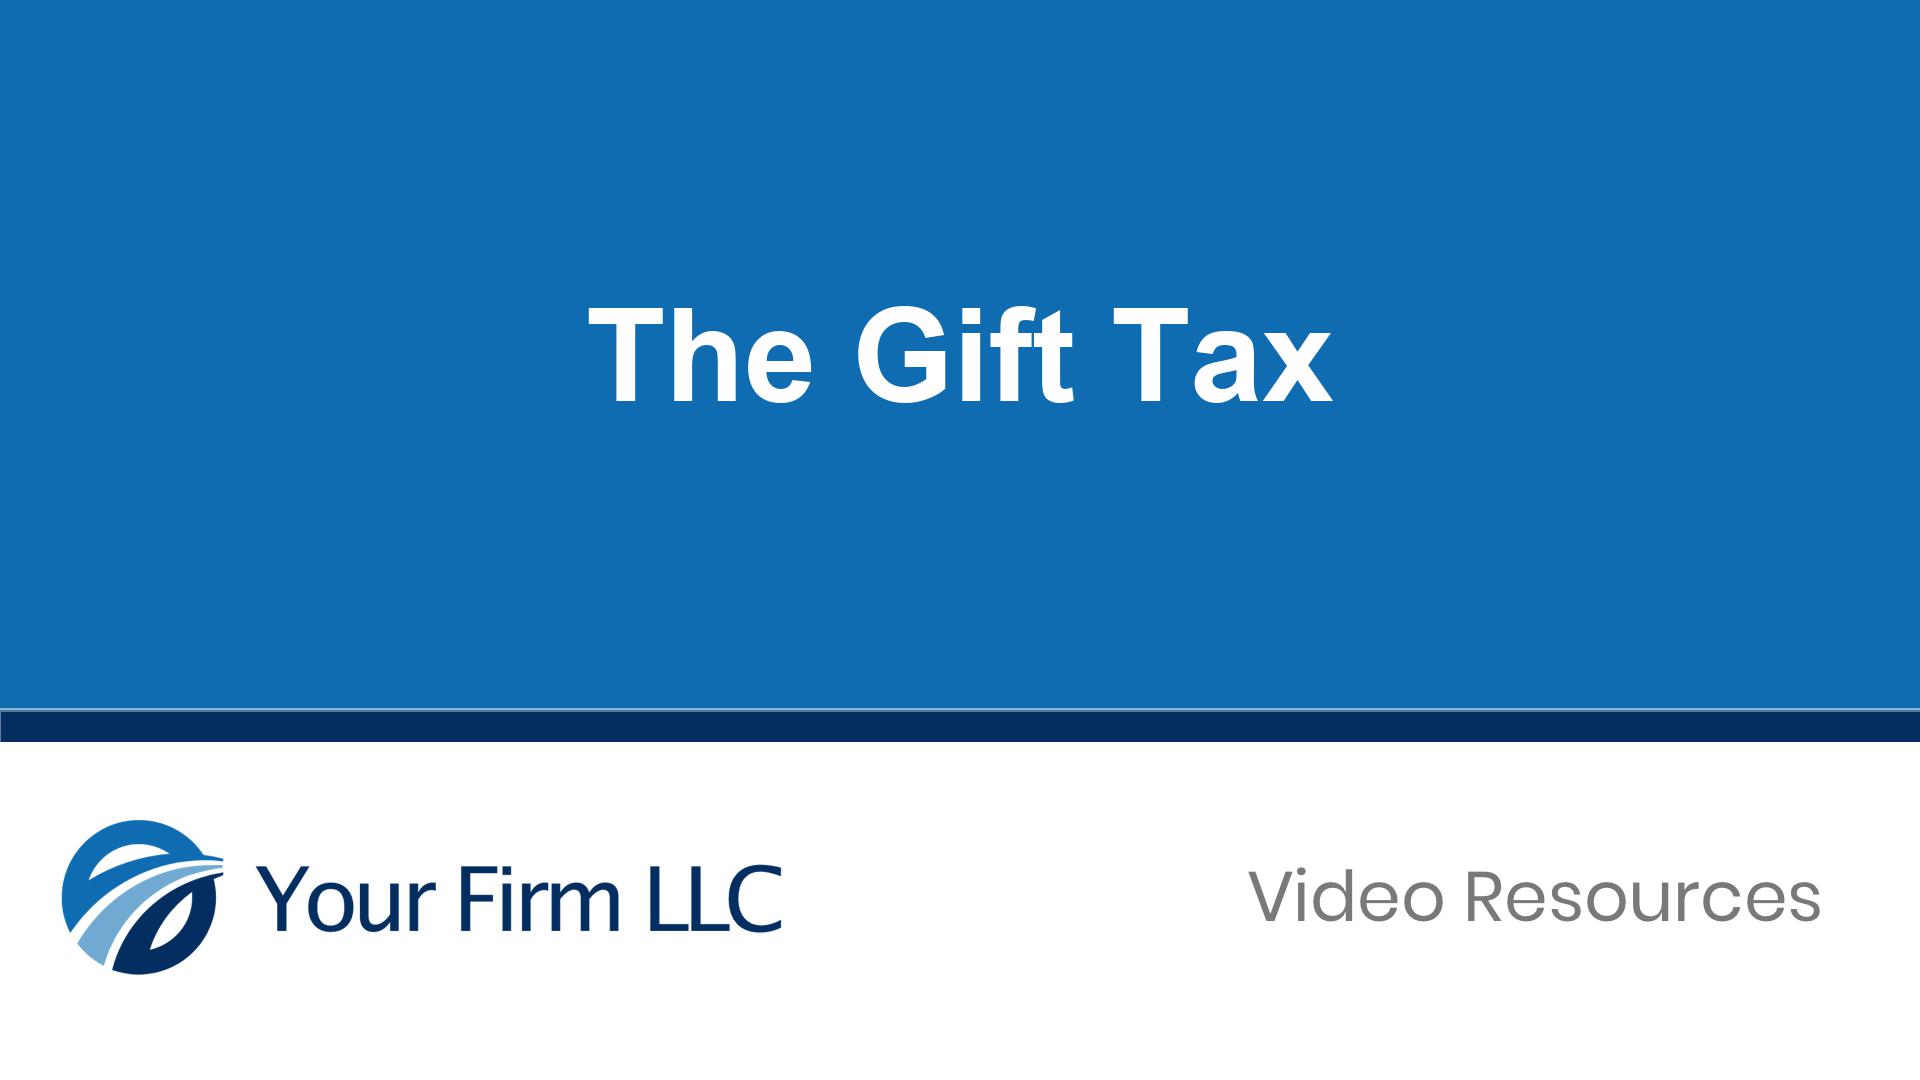 What you need to know about the Gift Tax